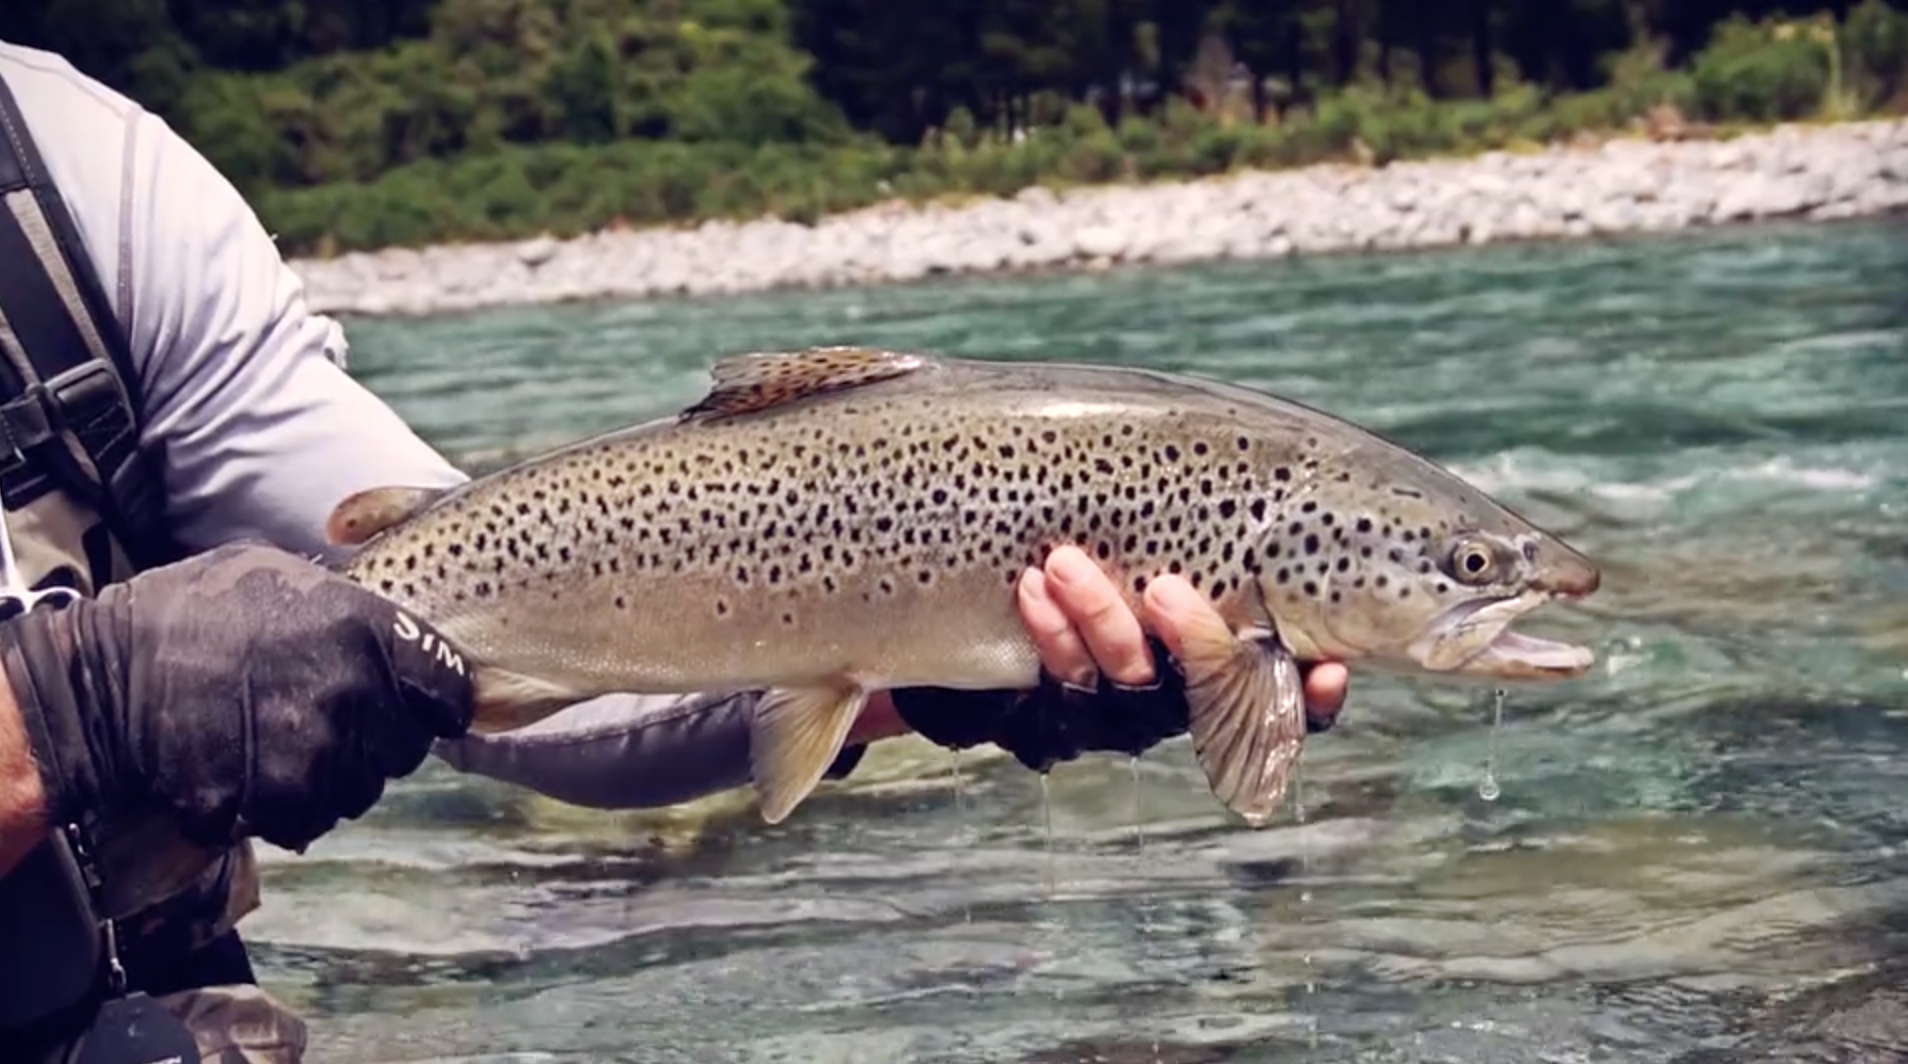 VIDEO: Fly fishing for big trout in New Zealand